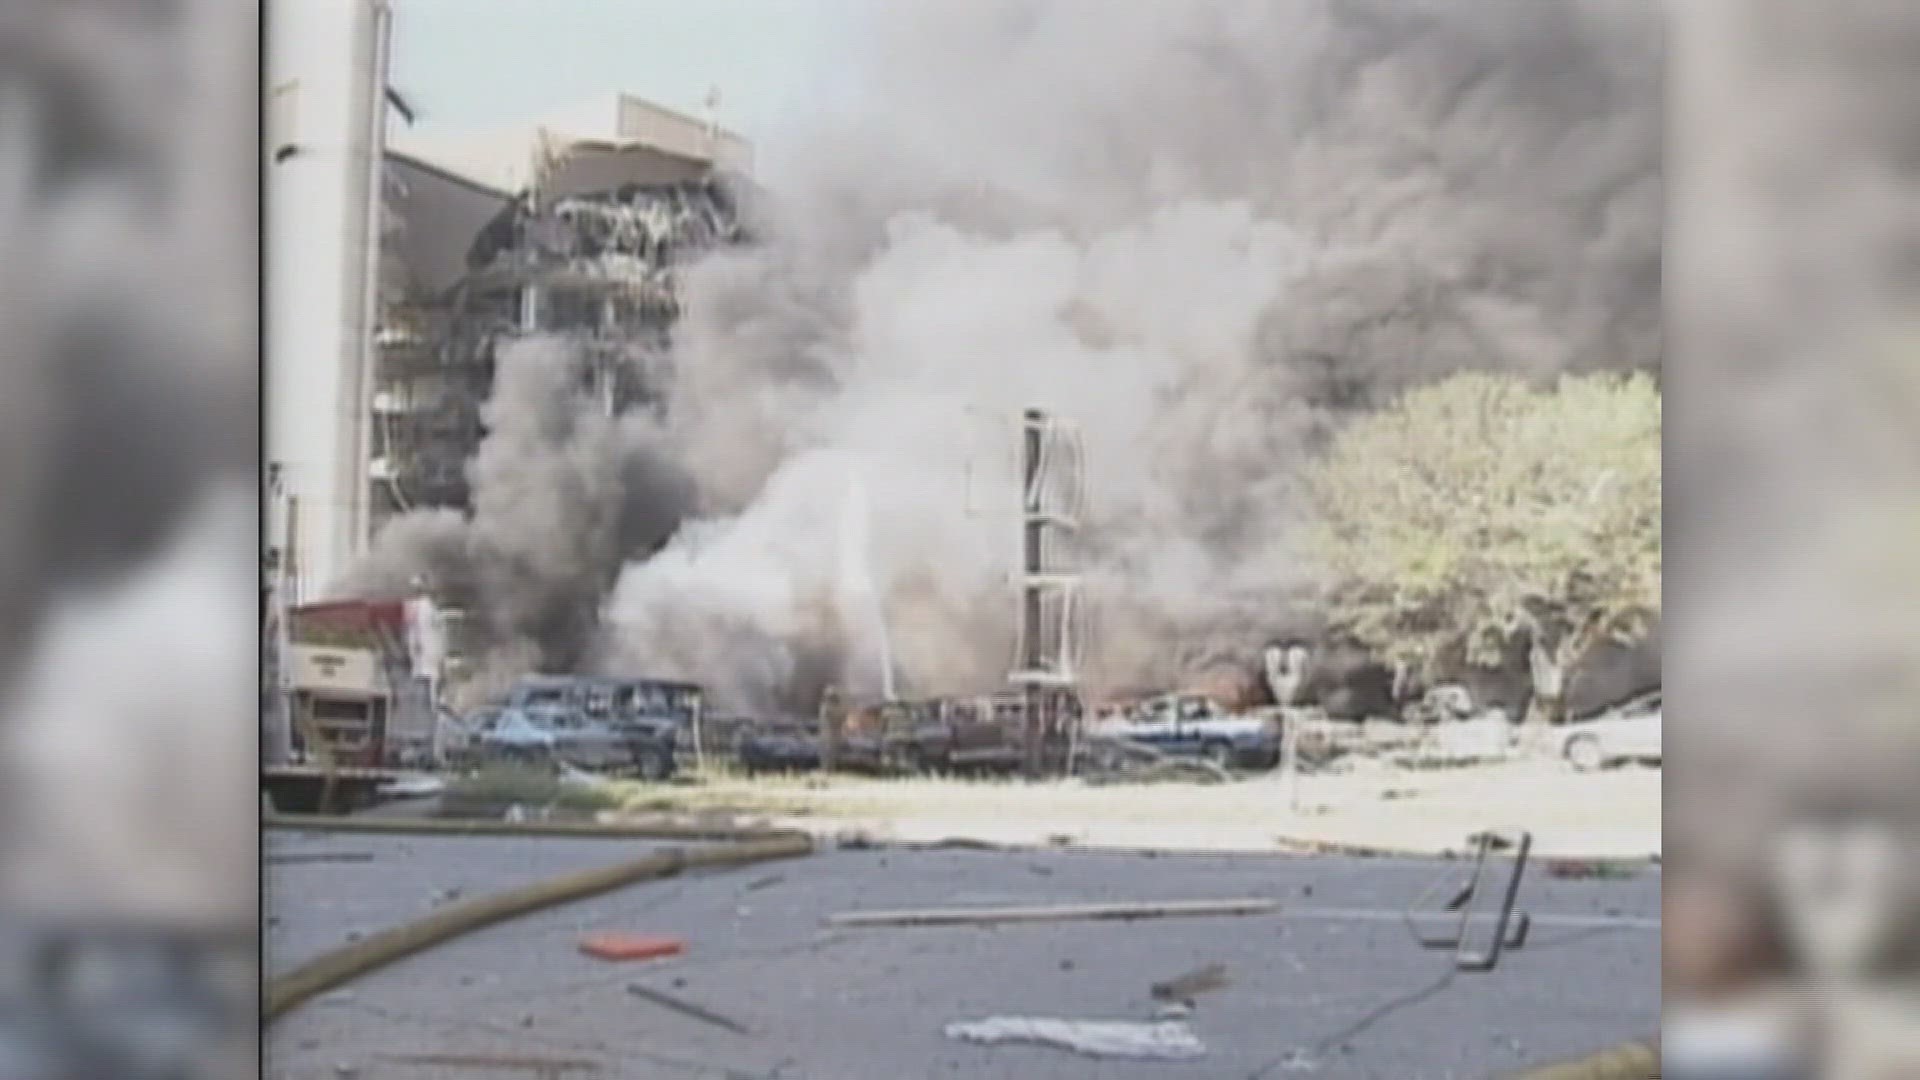 On April 19, 1995 a rental truck filled with explosives was detonated at a federal building, killing 168 people including 19 children at a daycare inside.